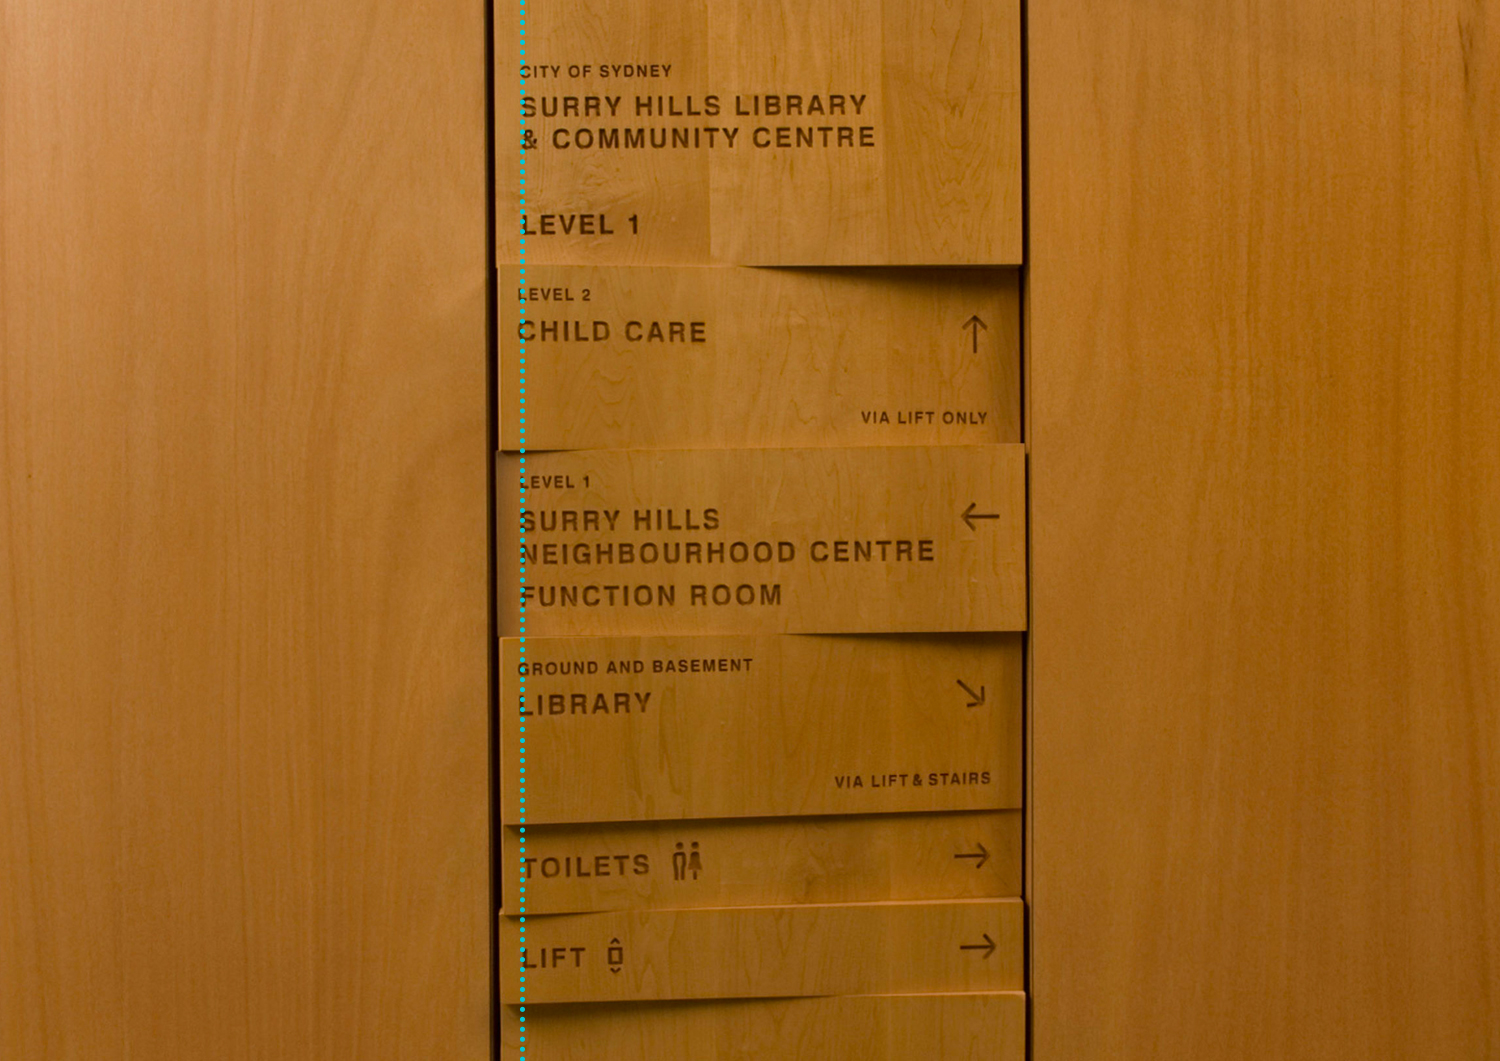 Library signage showing alignment in graphic design